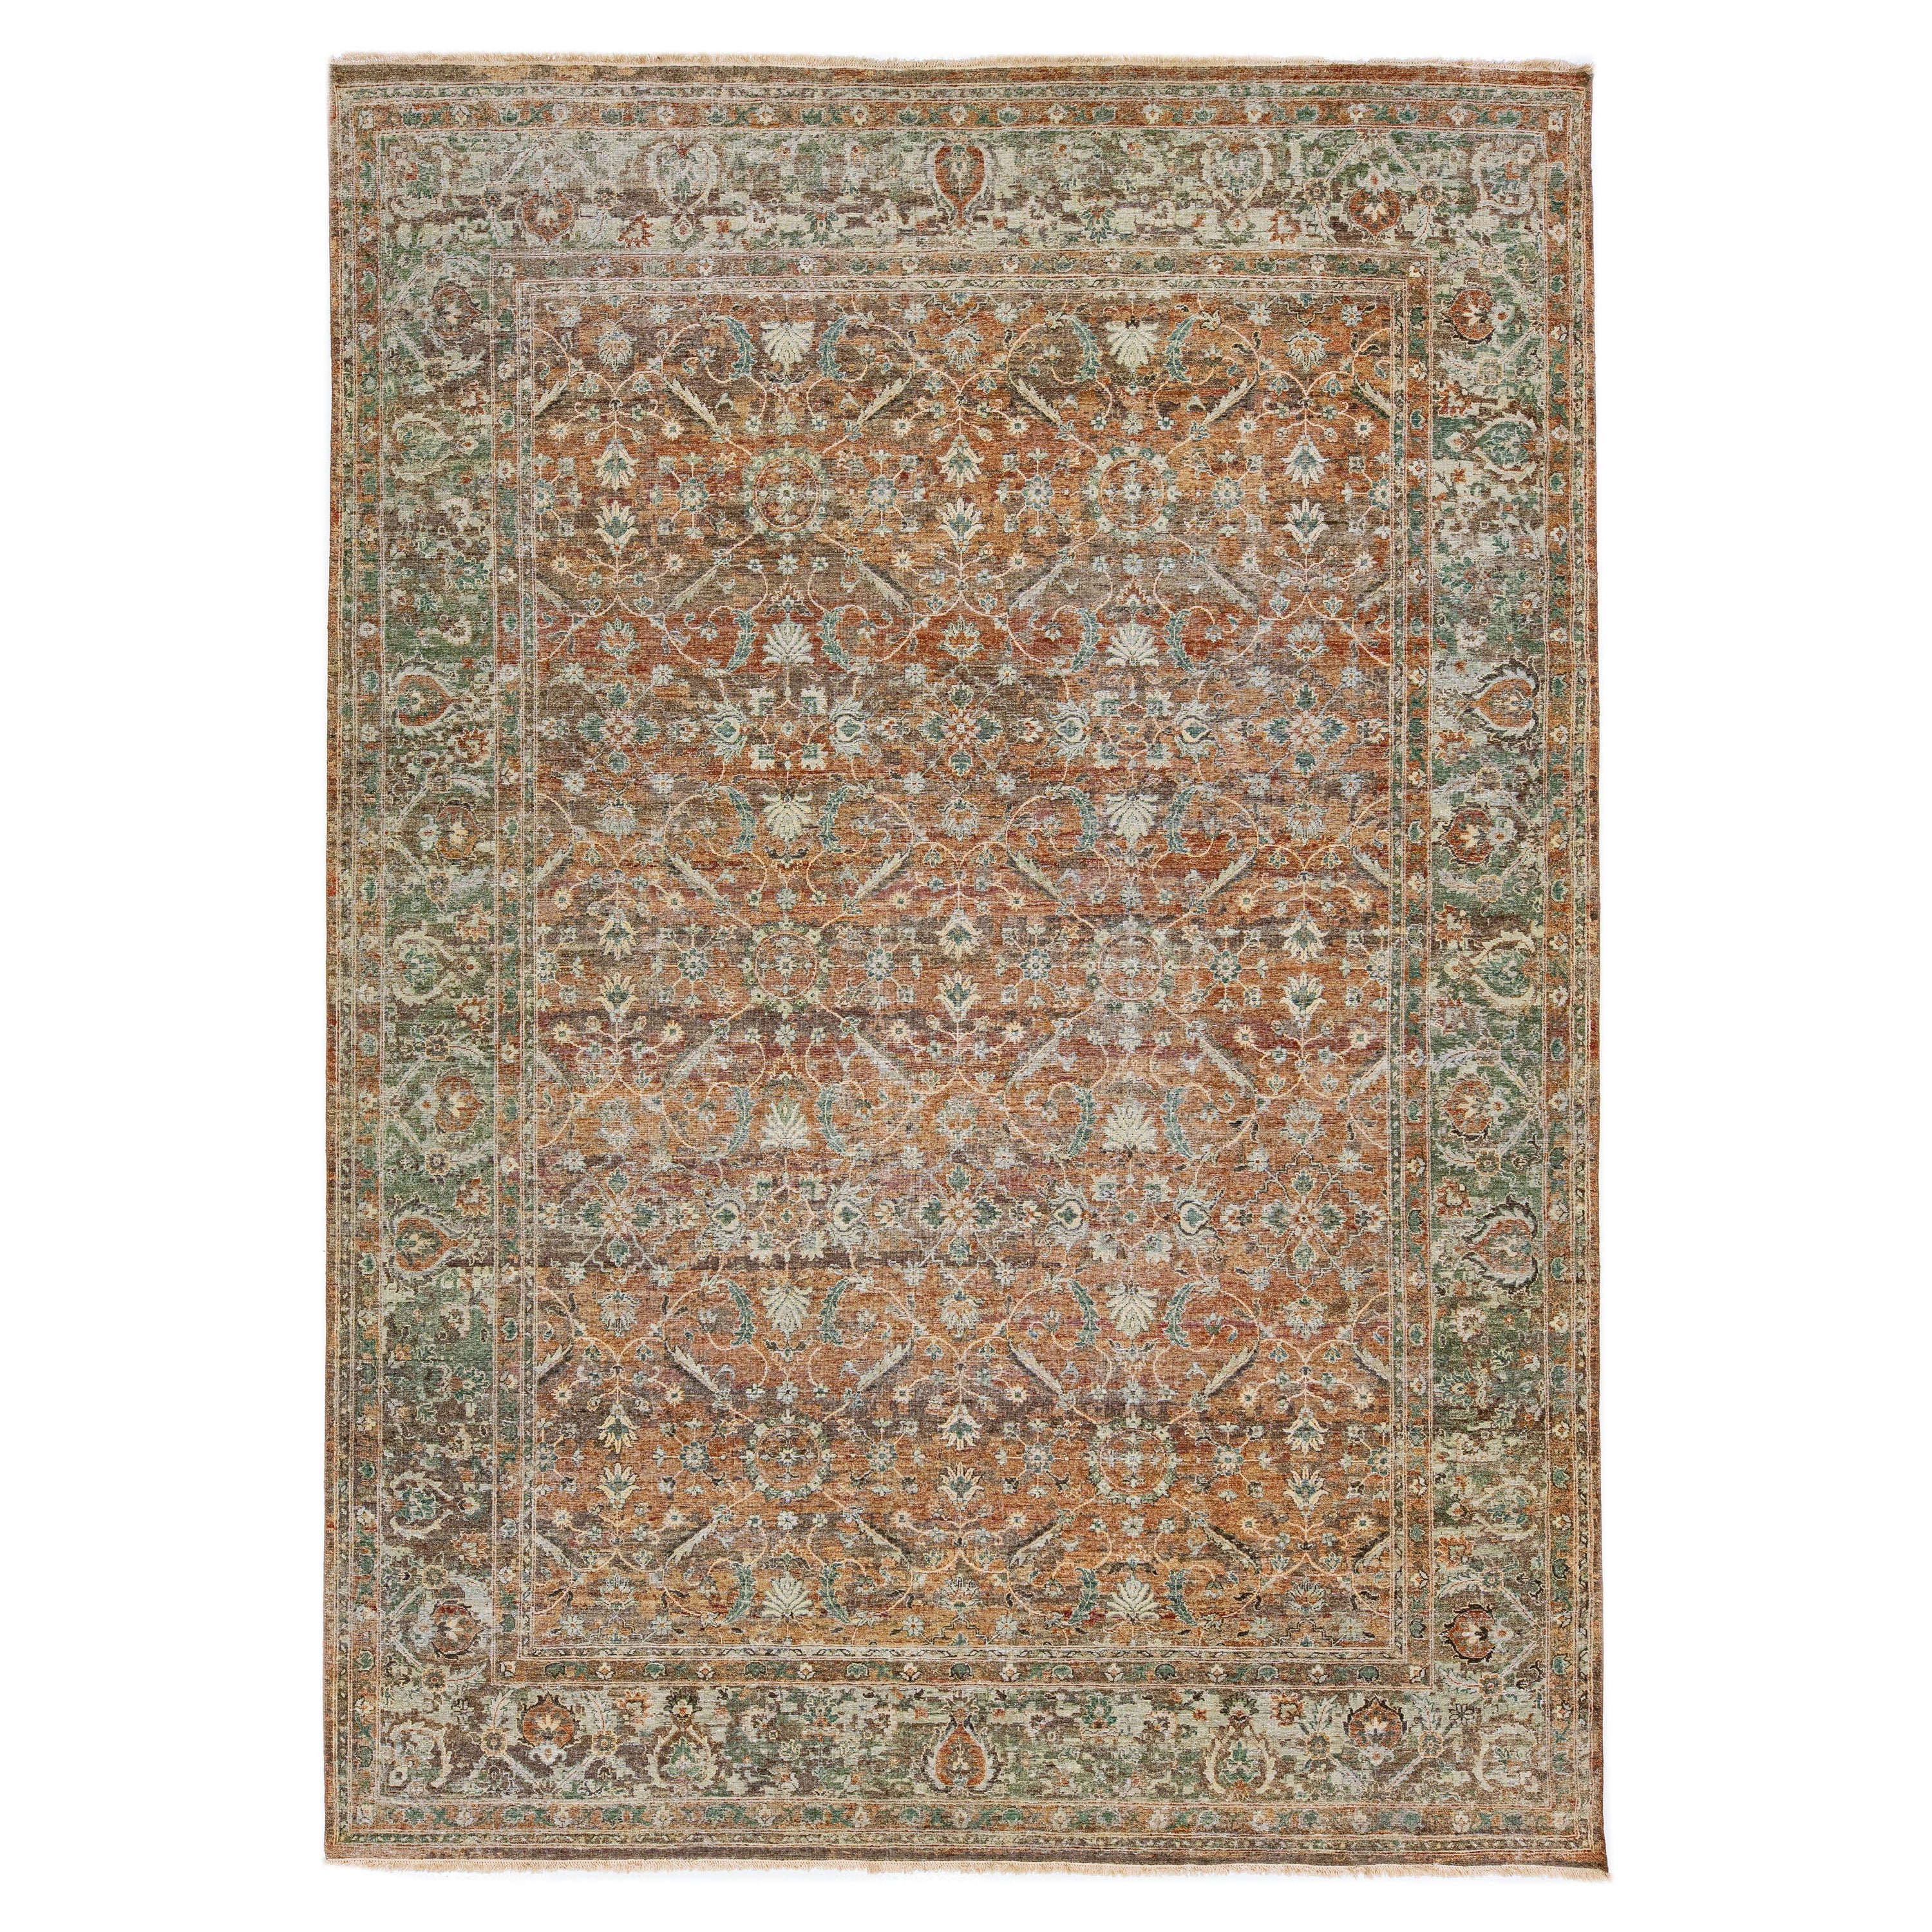 Apadana's Persian Tabriz Style Handmade Floral Wool Rug with Copper Field For Sale